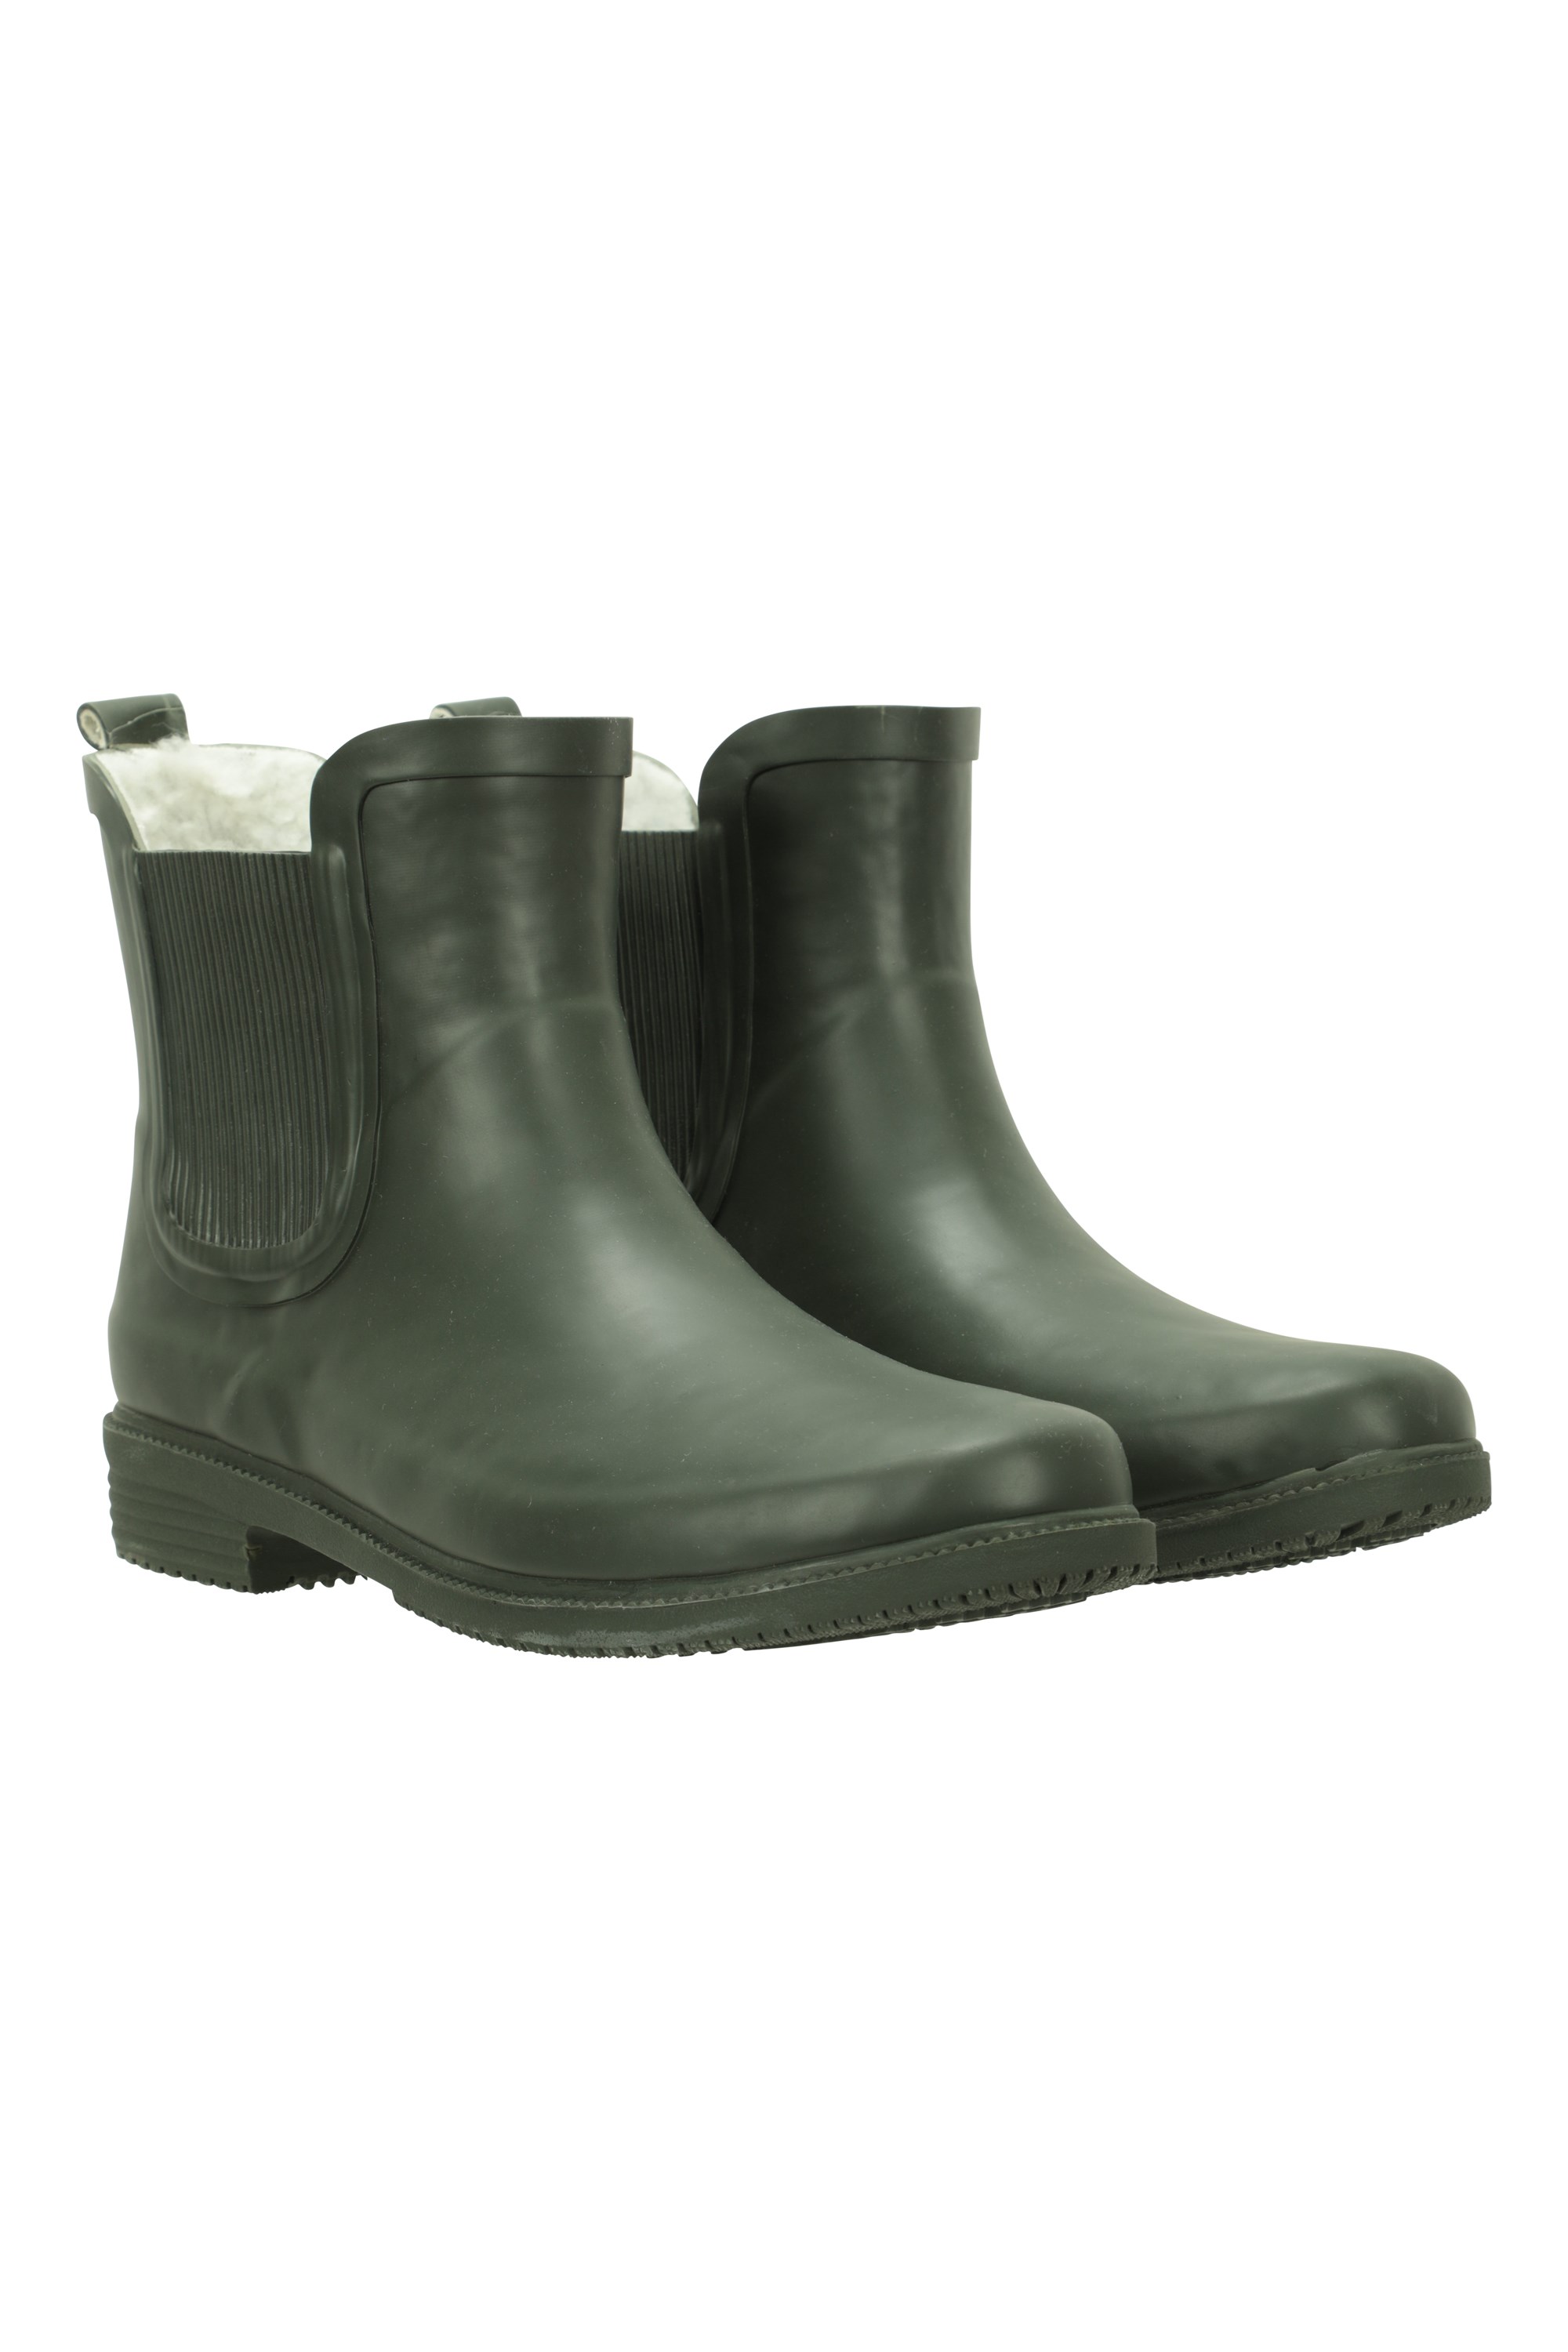 Womens Winter Ankle Wellies - Green